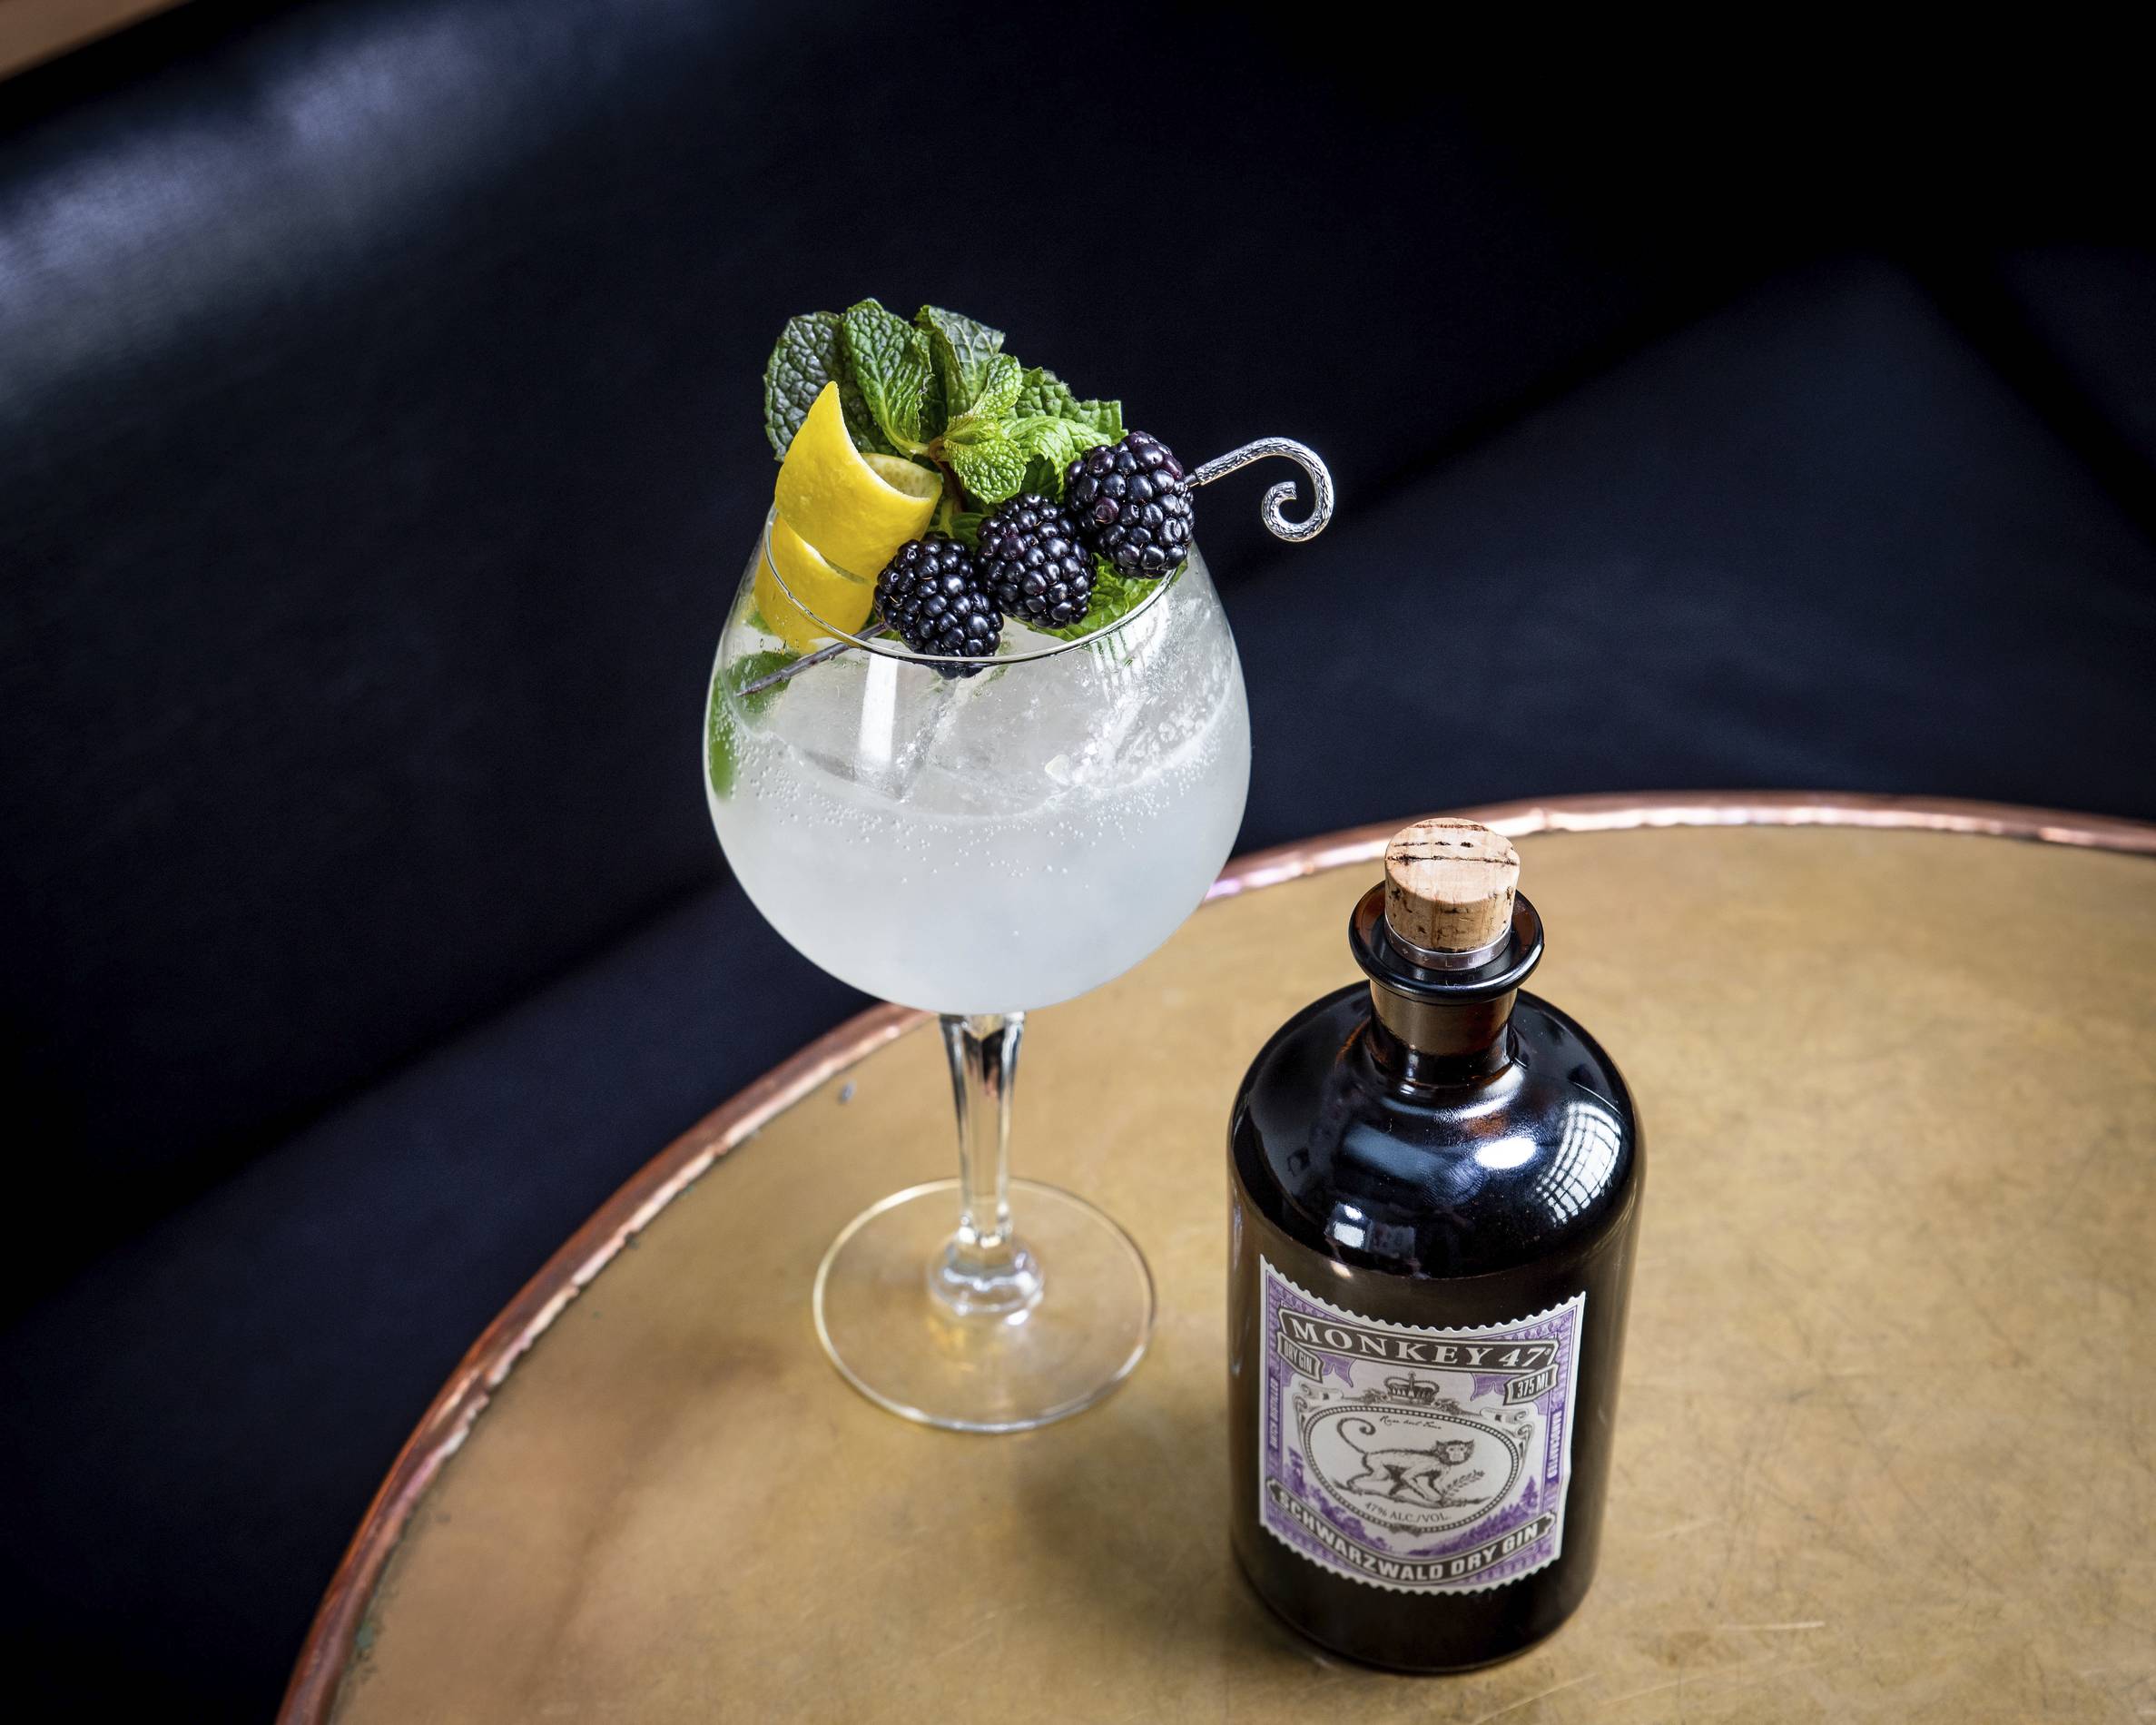 Monkey 47 S Cocktail Recipe For The Most Refreshing Summer Gin Drink,Mind Eraser